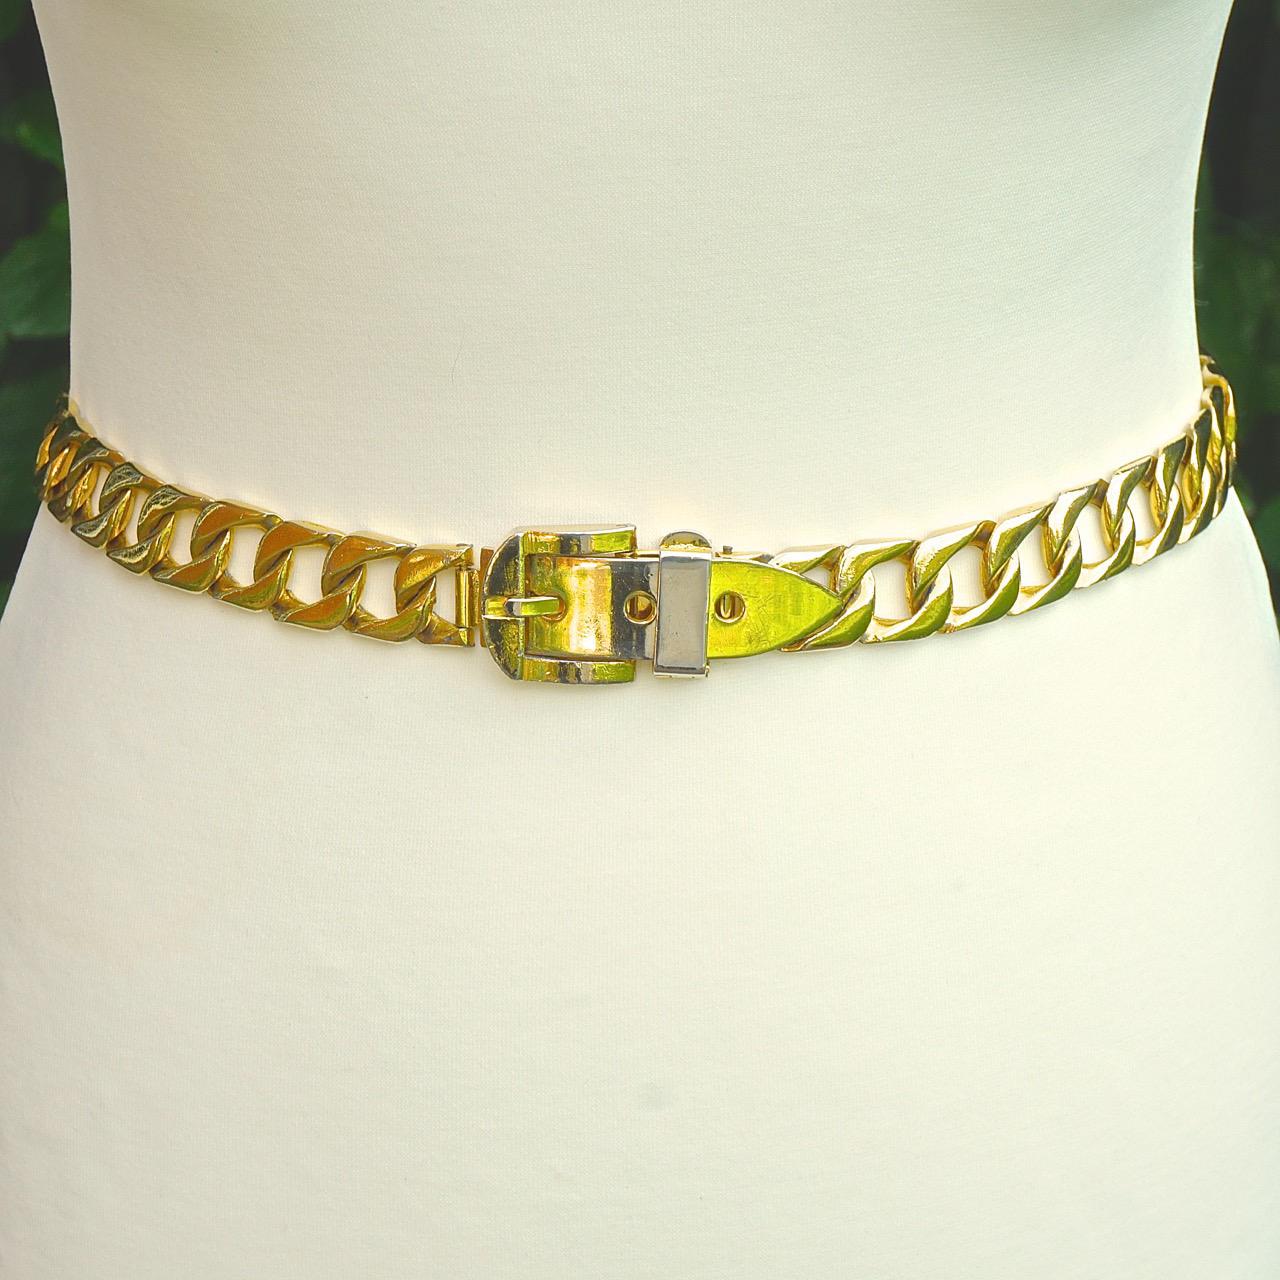 Shiny gold plated adjustable curb link chain belt, with a buckle design. Measuring length 79cm / 31 inches by chain width 2cm / .78 inch. The belt is adjustable from approximately 75.5cm / 29.7 inches to 70cm / 27.5 inches. There is scratching and